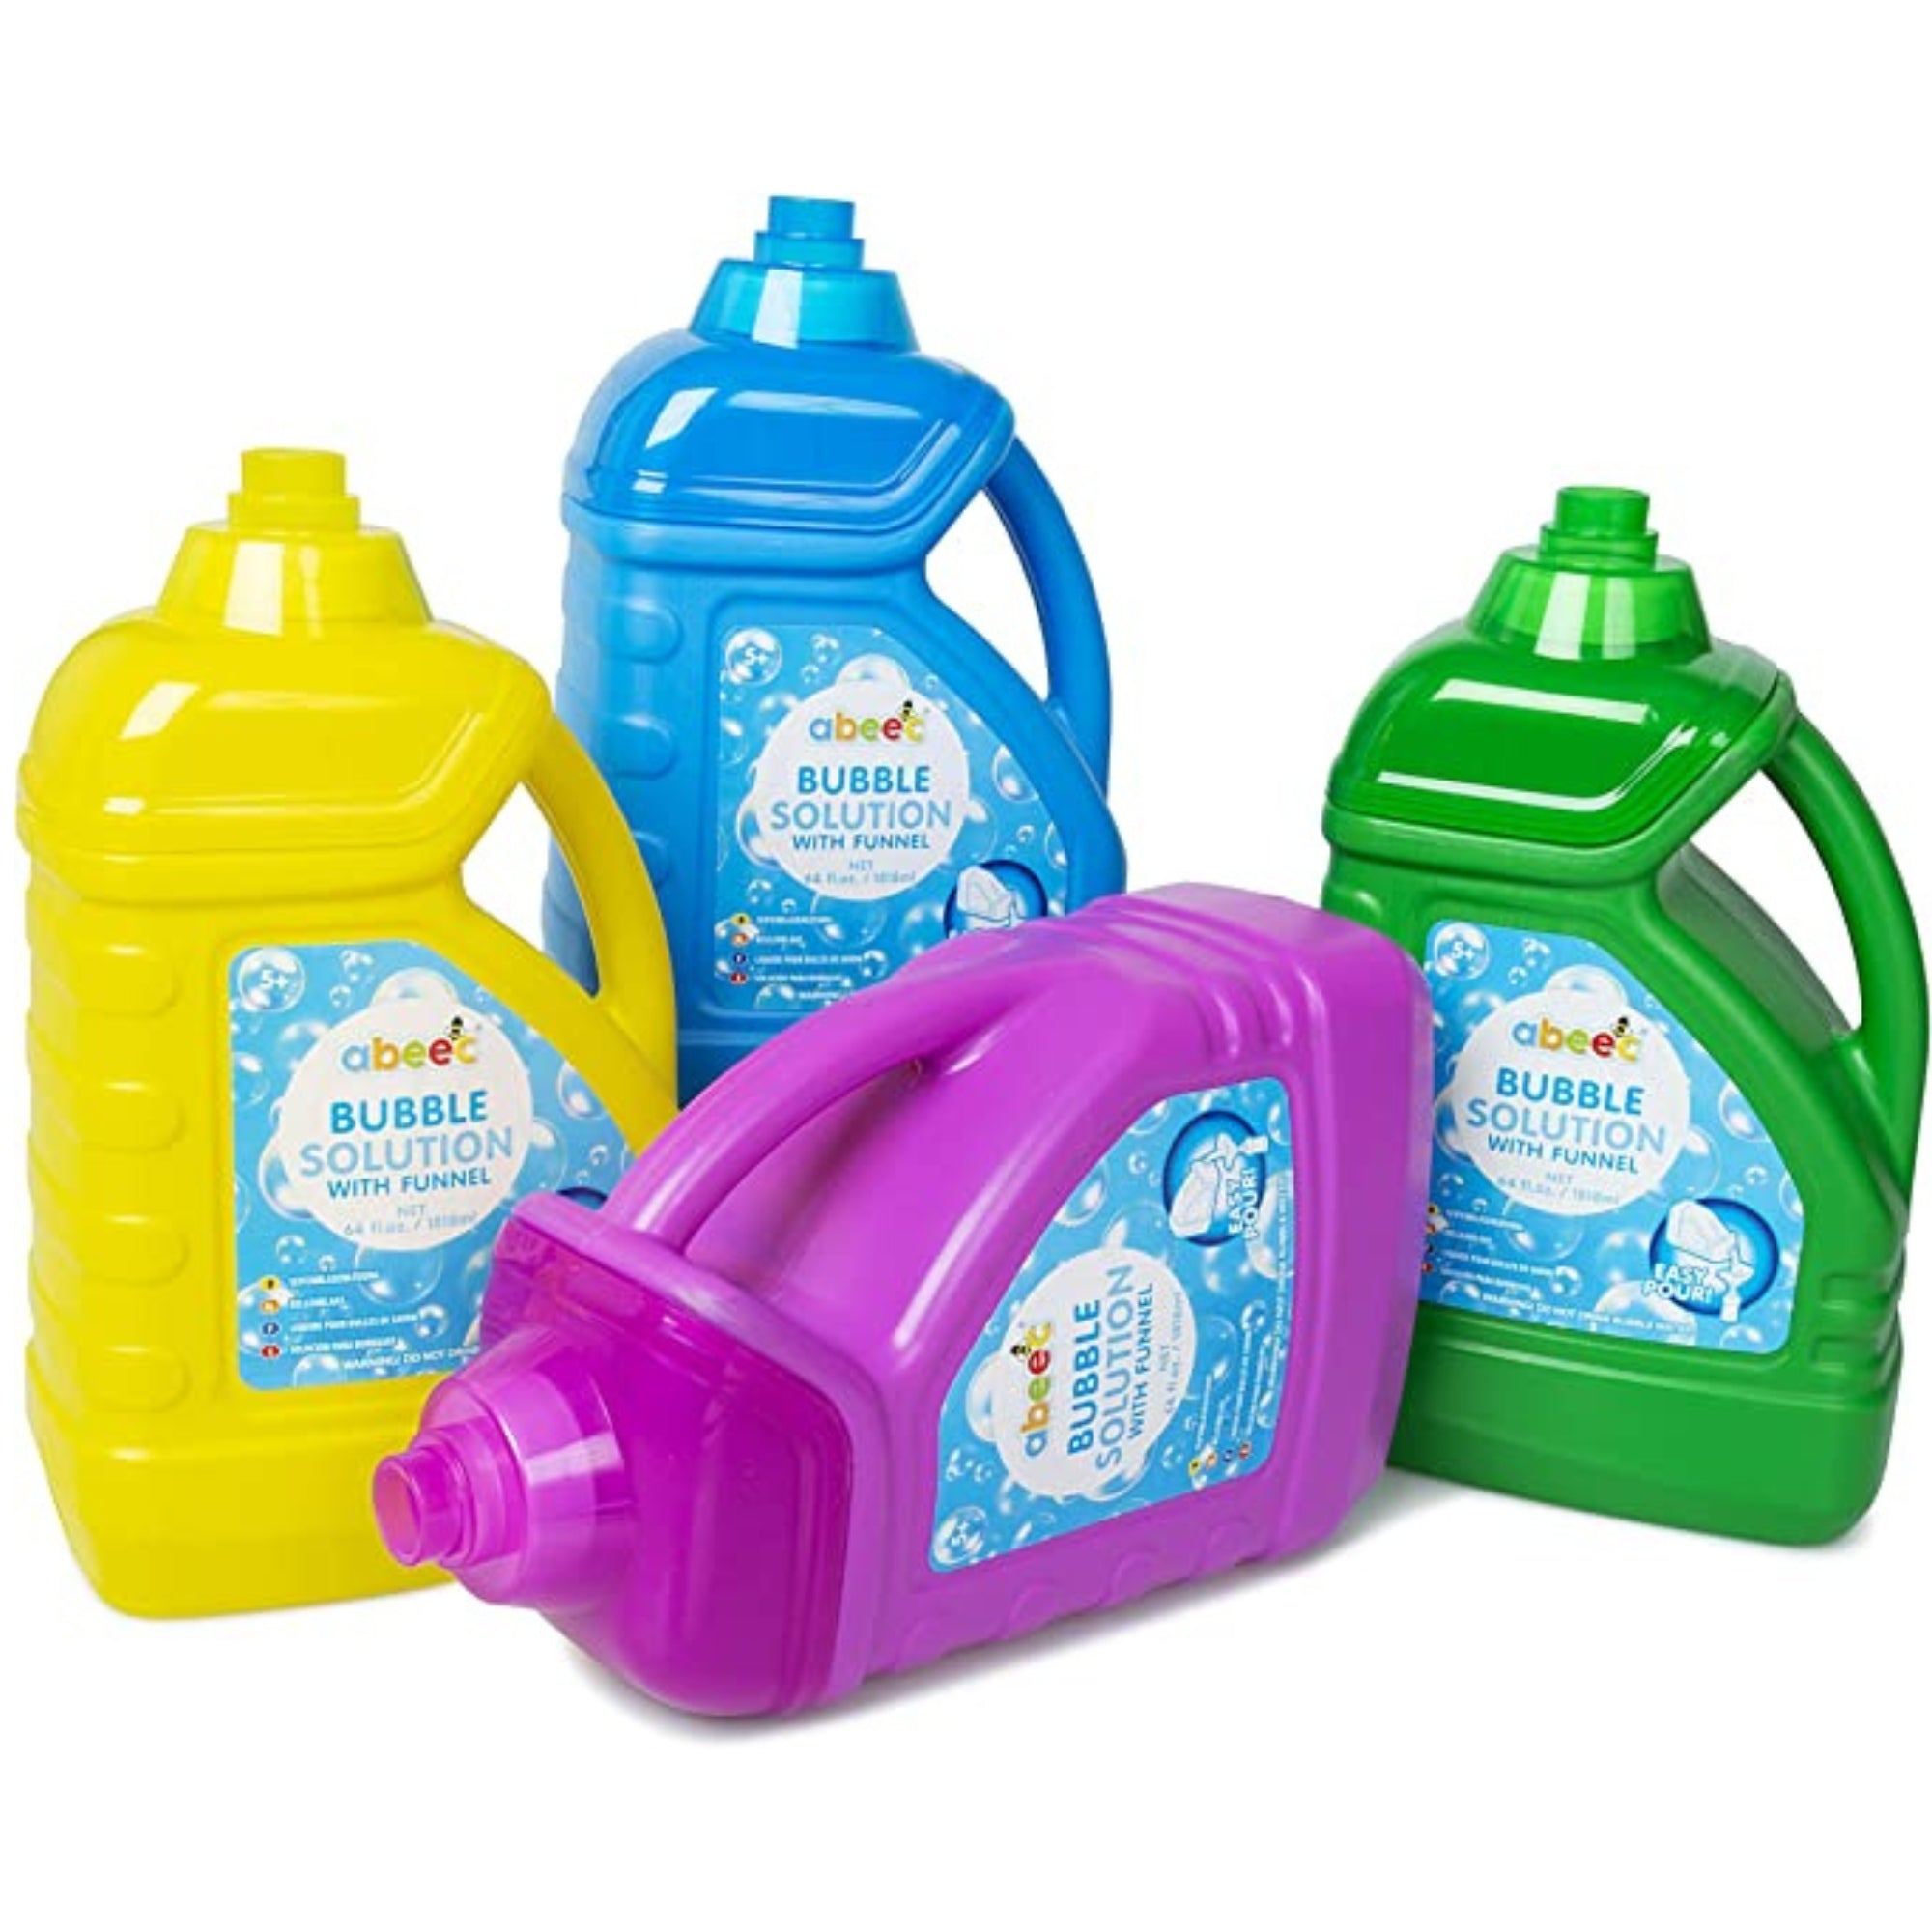 1.8 Litre Bubble Solution, Use the 1.8 Litre Bubble Solution to create a world of sensory wonder on a budget.Bubble tubs are a great multi-sensory pocket money item for all ages and are so flexible in the play opportunities offered,from visual tracking skills to exercise outdoors through to respiratory skills.The 1.8 Litre Bubble Solution comes with an easy pour lid. Filled with safe and non toxic bubble fluid, and supplied with a wand so you can create bubbles. Bubbles are great for: Facial and respiratory